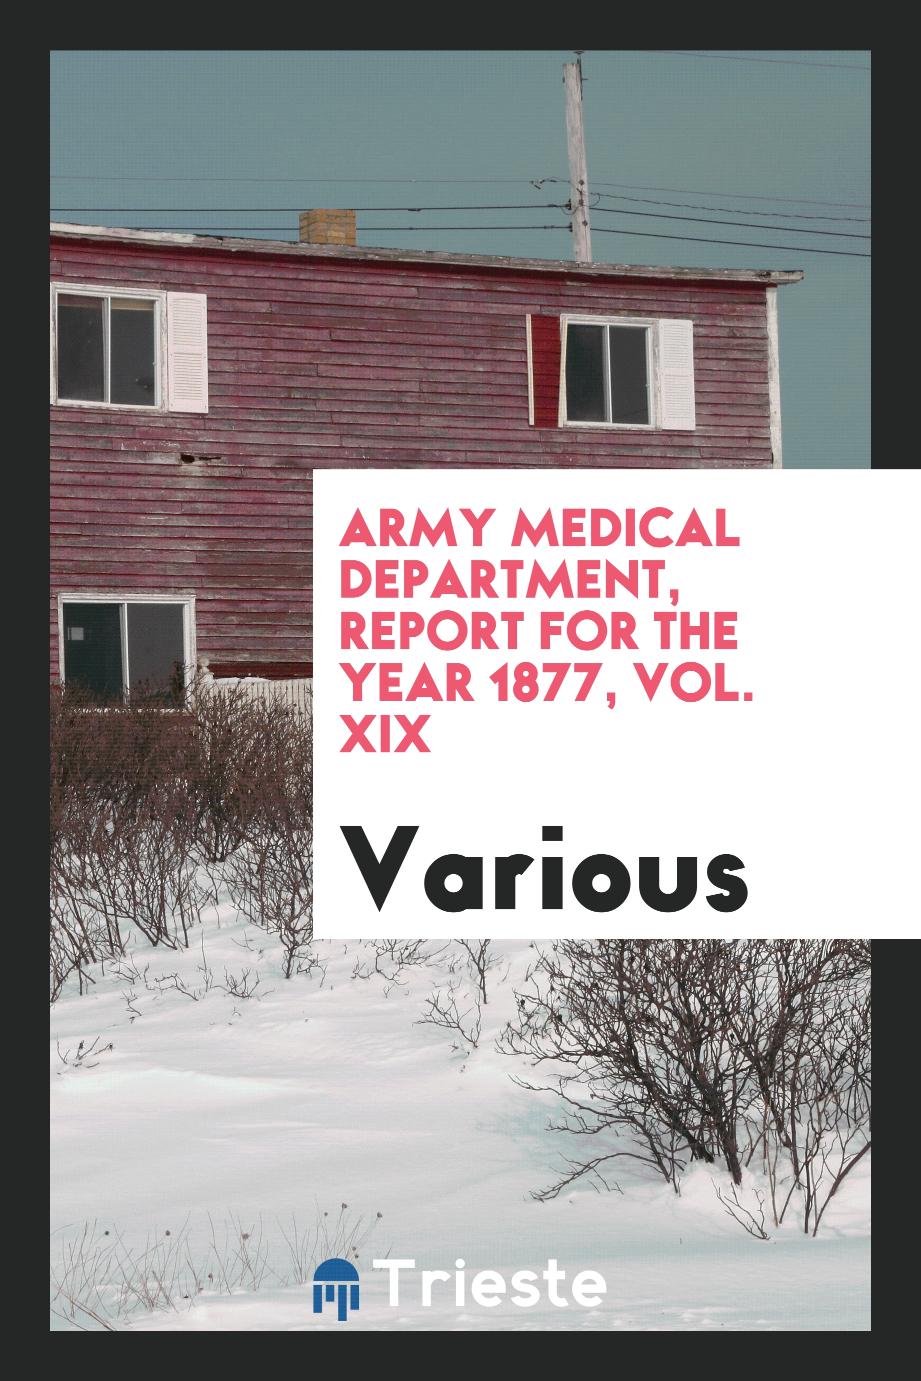 Army Medical Department, Report for the Year 1877, Vol. XIX